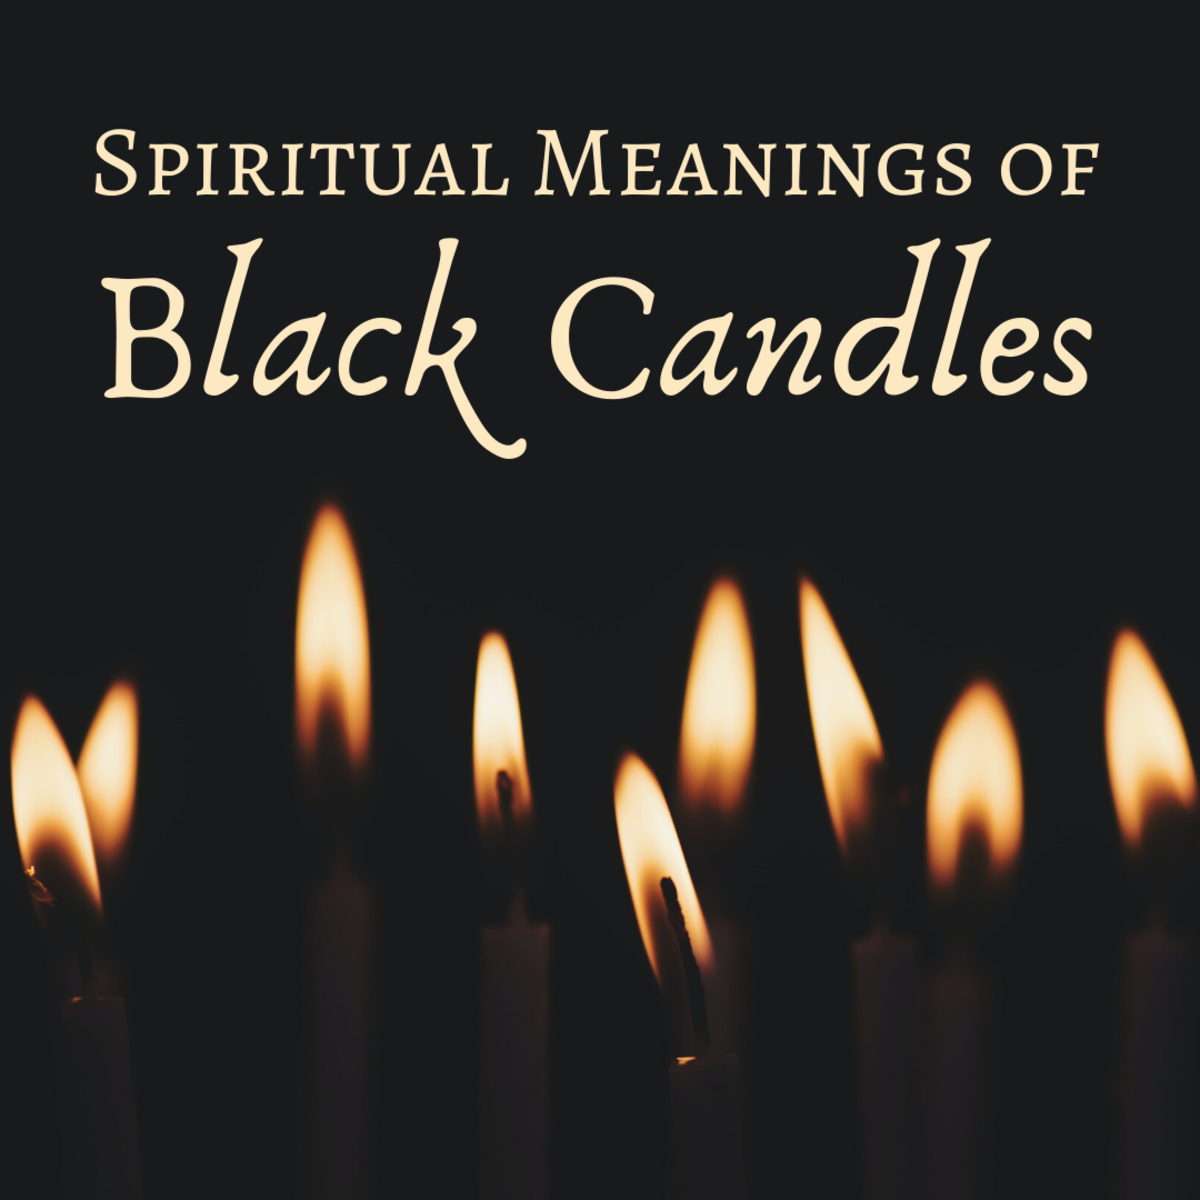 Black candles are popular in Pagan, Wiccan, and Satanic practices and can be used during prayer, for cleansing, or to invoke power, money, or energy.